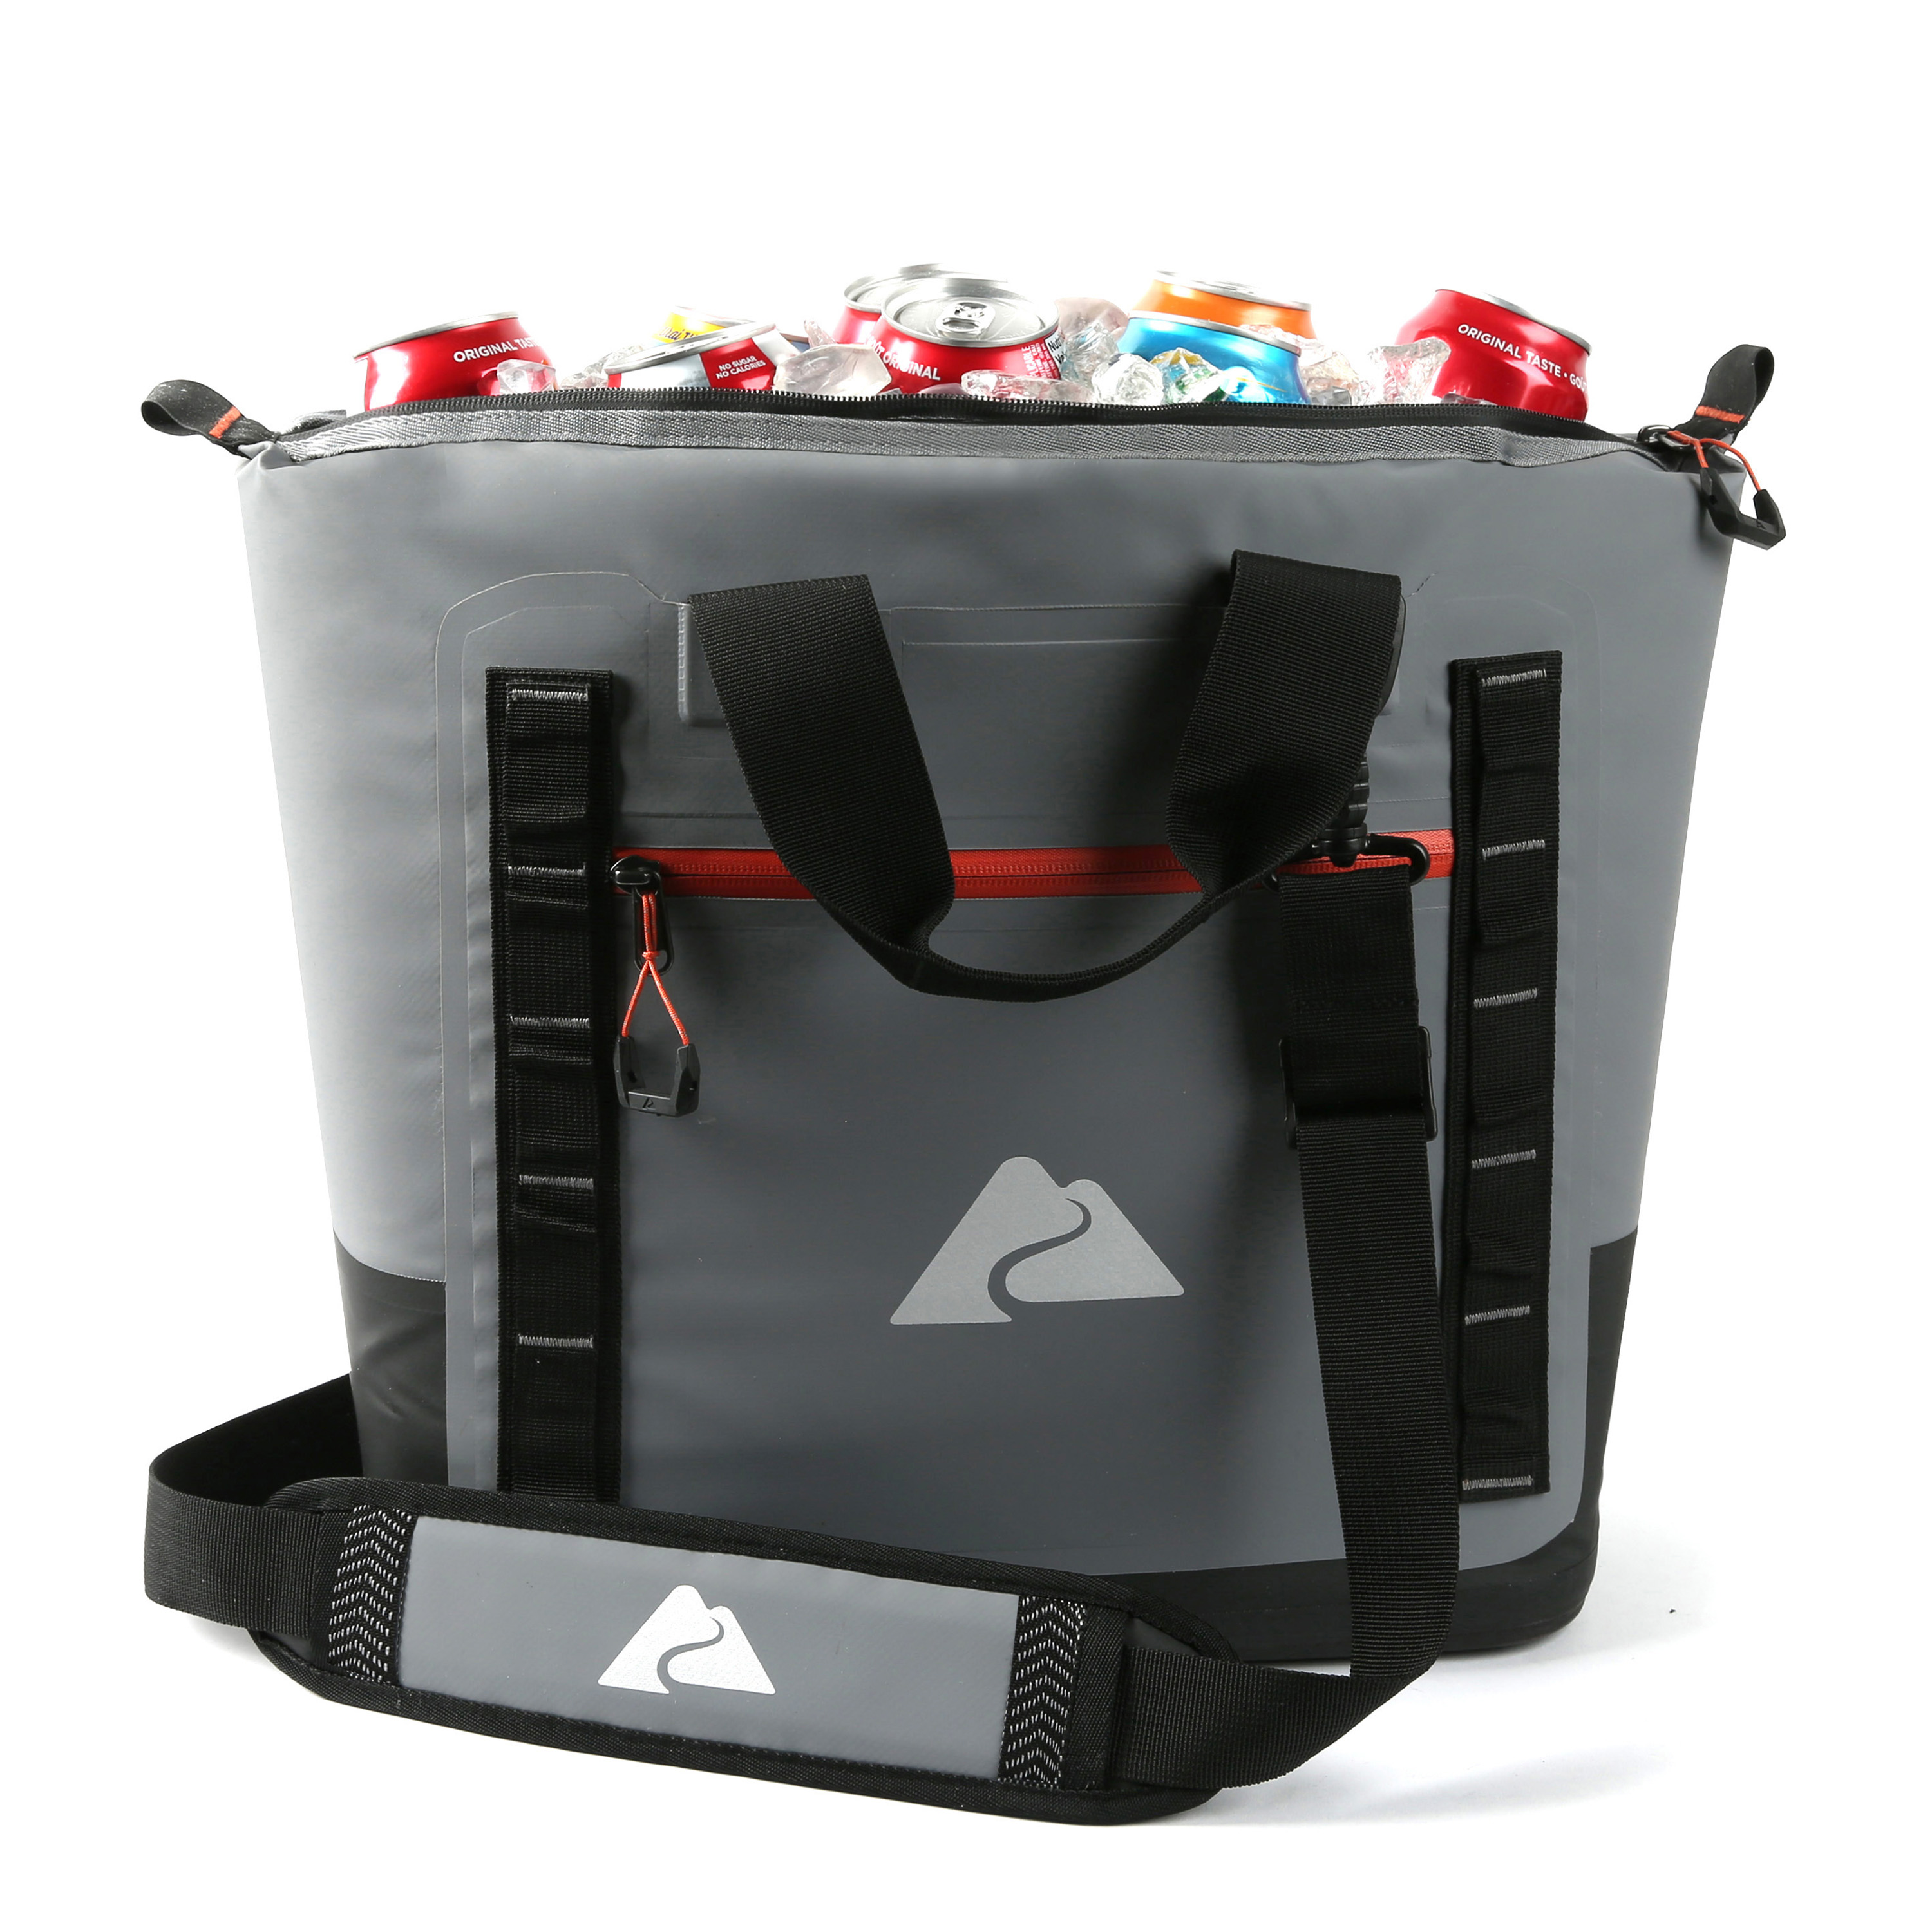 Ozark Trail 30 Can Welded Sport Tote Cooler, Soft Sided Cooler with Microban®, Gray - image 5 of 14